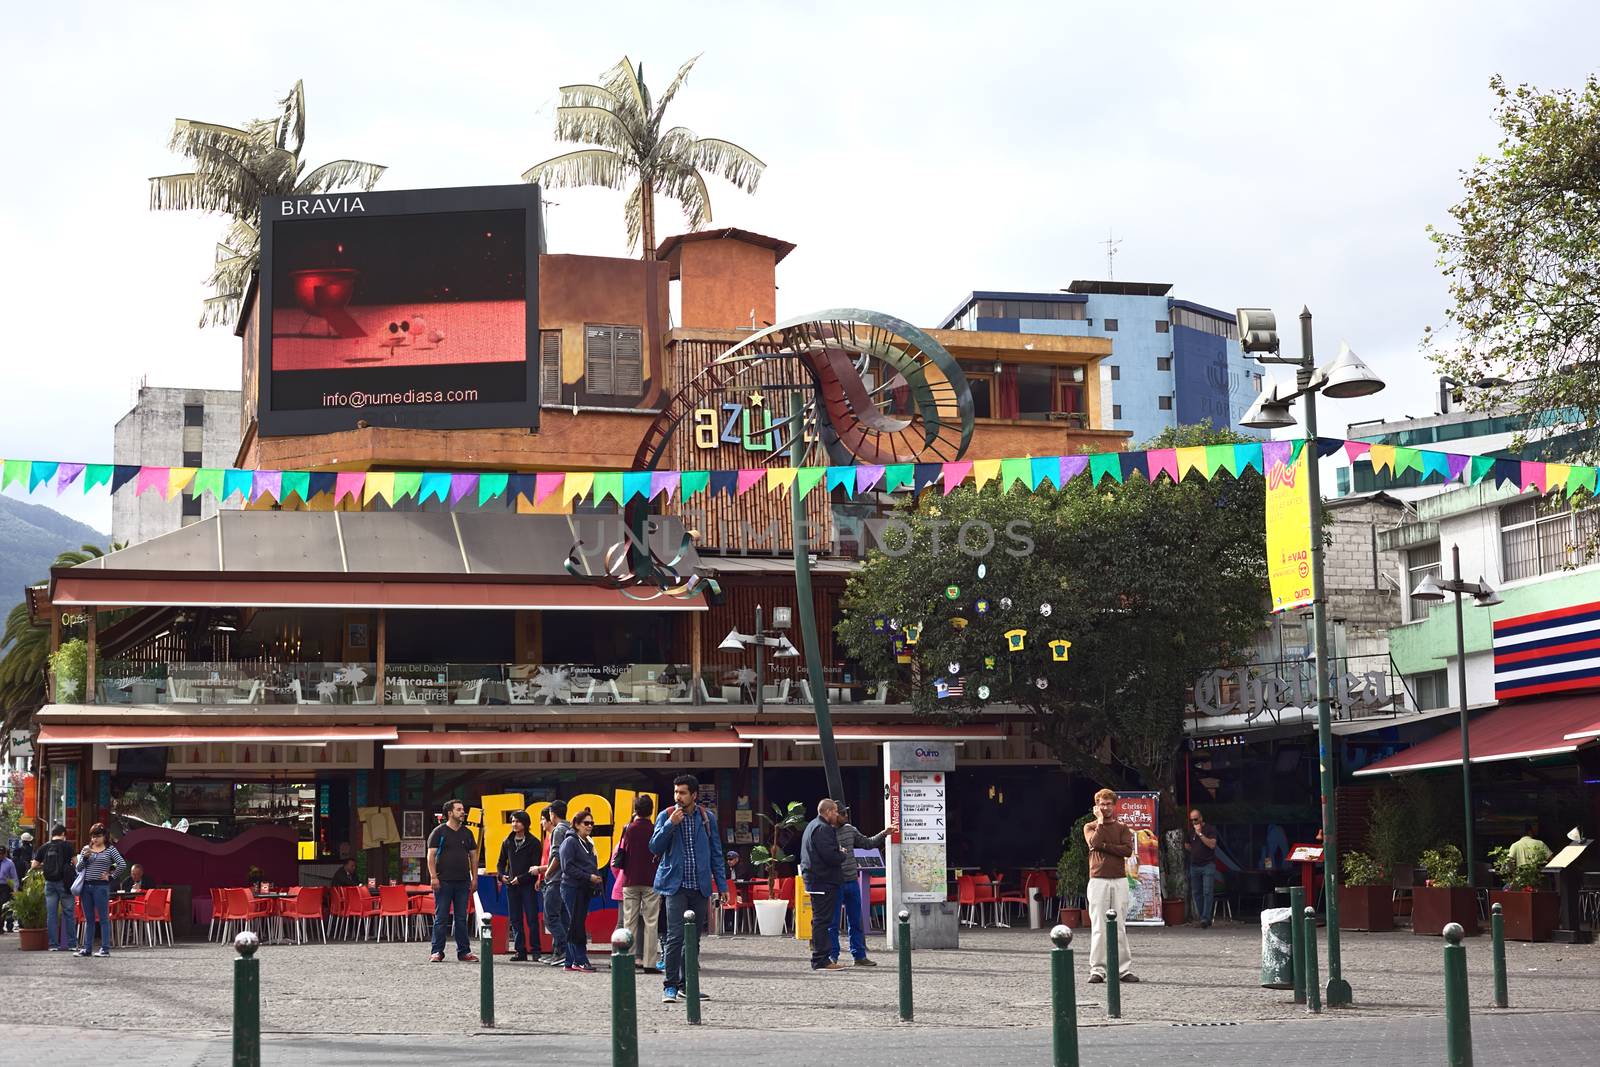 QUITO, ECUADOR - AUGUST 6, 2014: Unidentified people standing on Plaza Foch in front of the Azuca Latin Bistro and Chelsea restaurant-bar-lounge in the tourist district La Mariscal on August 6, 2014 in Quito, Ecuador. Plaza Foch is situated at the intersection of the streets Reina Victoria and Mariscal Foch, around which many hostels, bars, restaurants and other facilities for tourism and entertainment are located. 